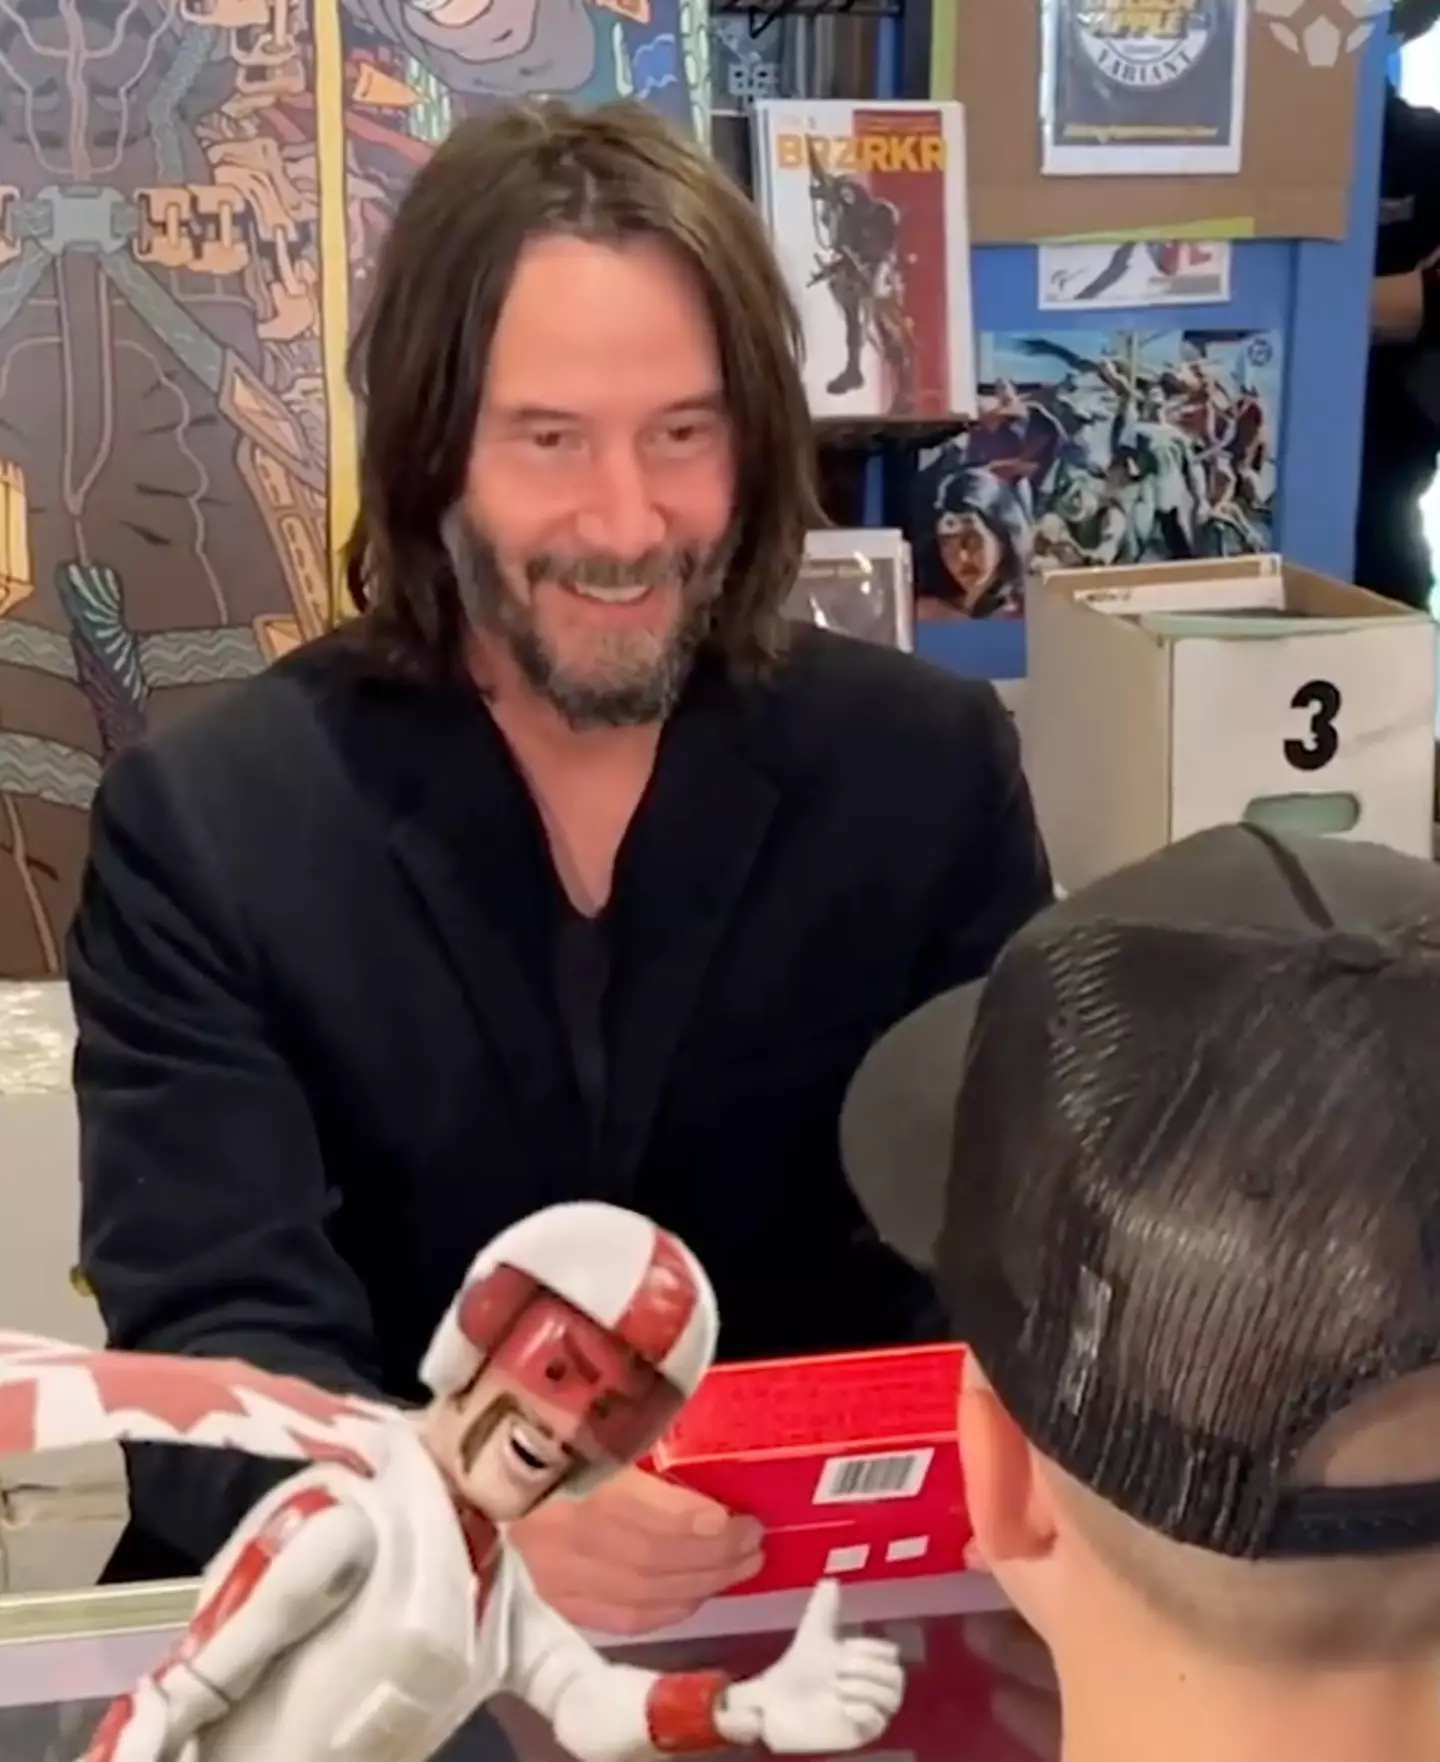 And just when we thought Keanu Reeves couldn't get any more loveable than he already is.